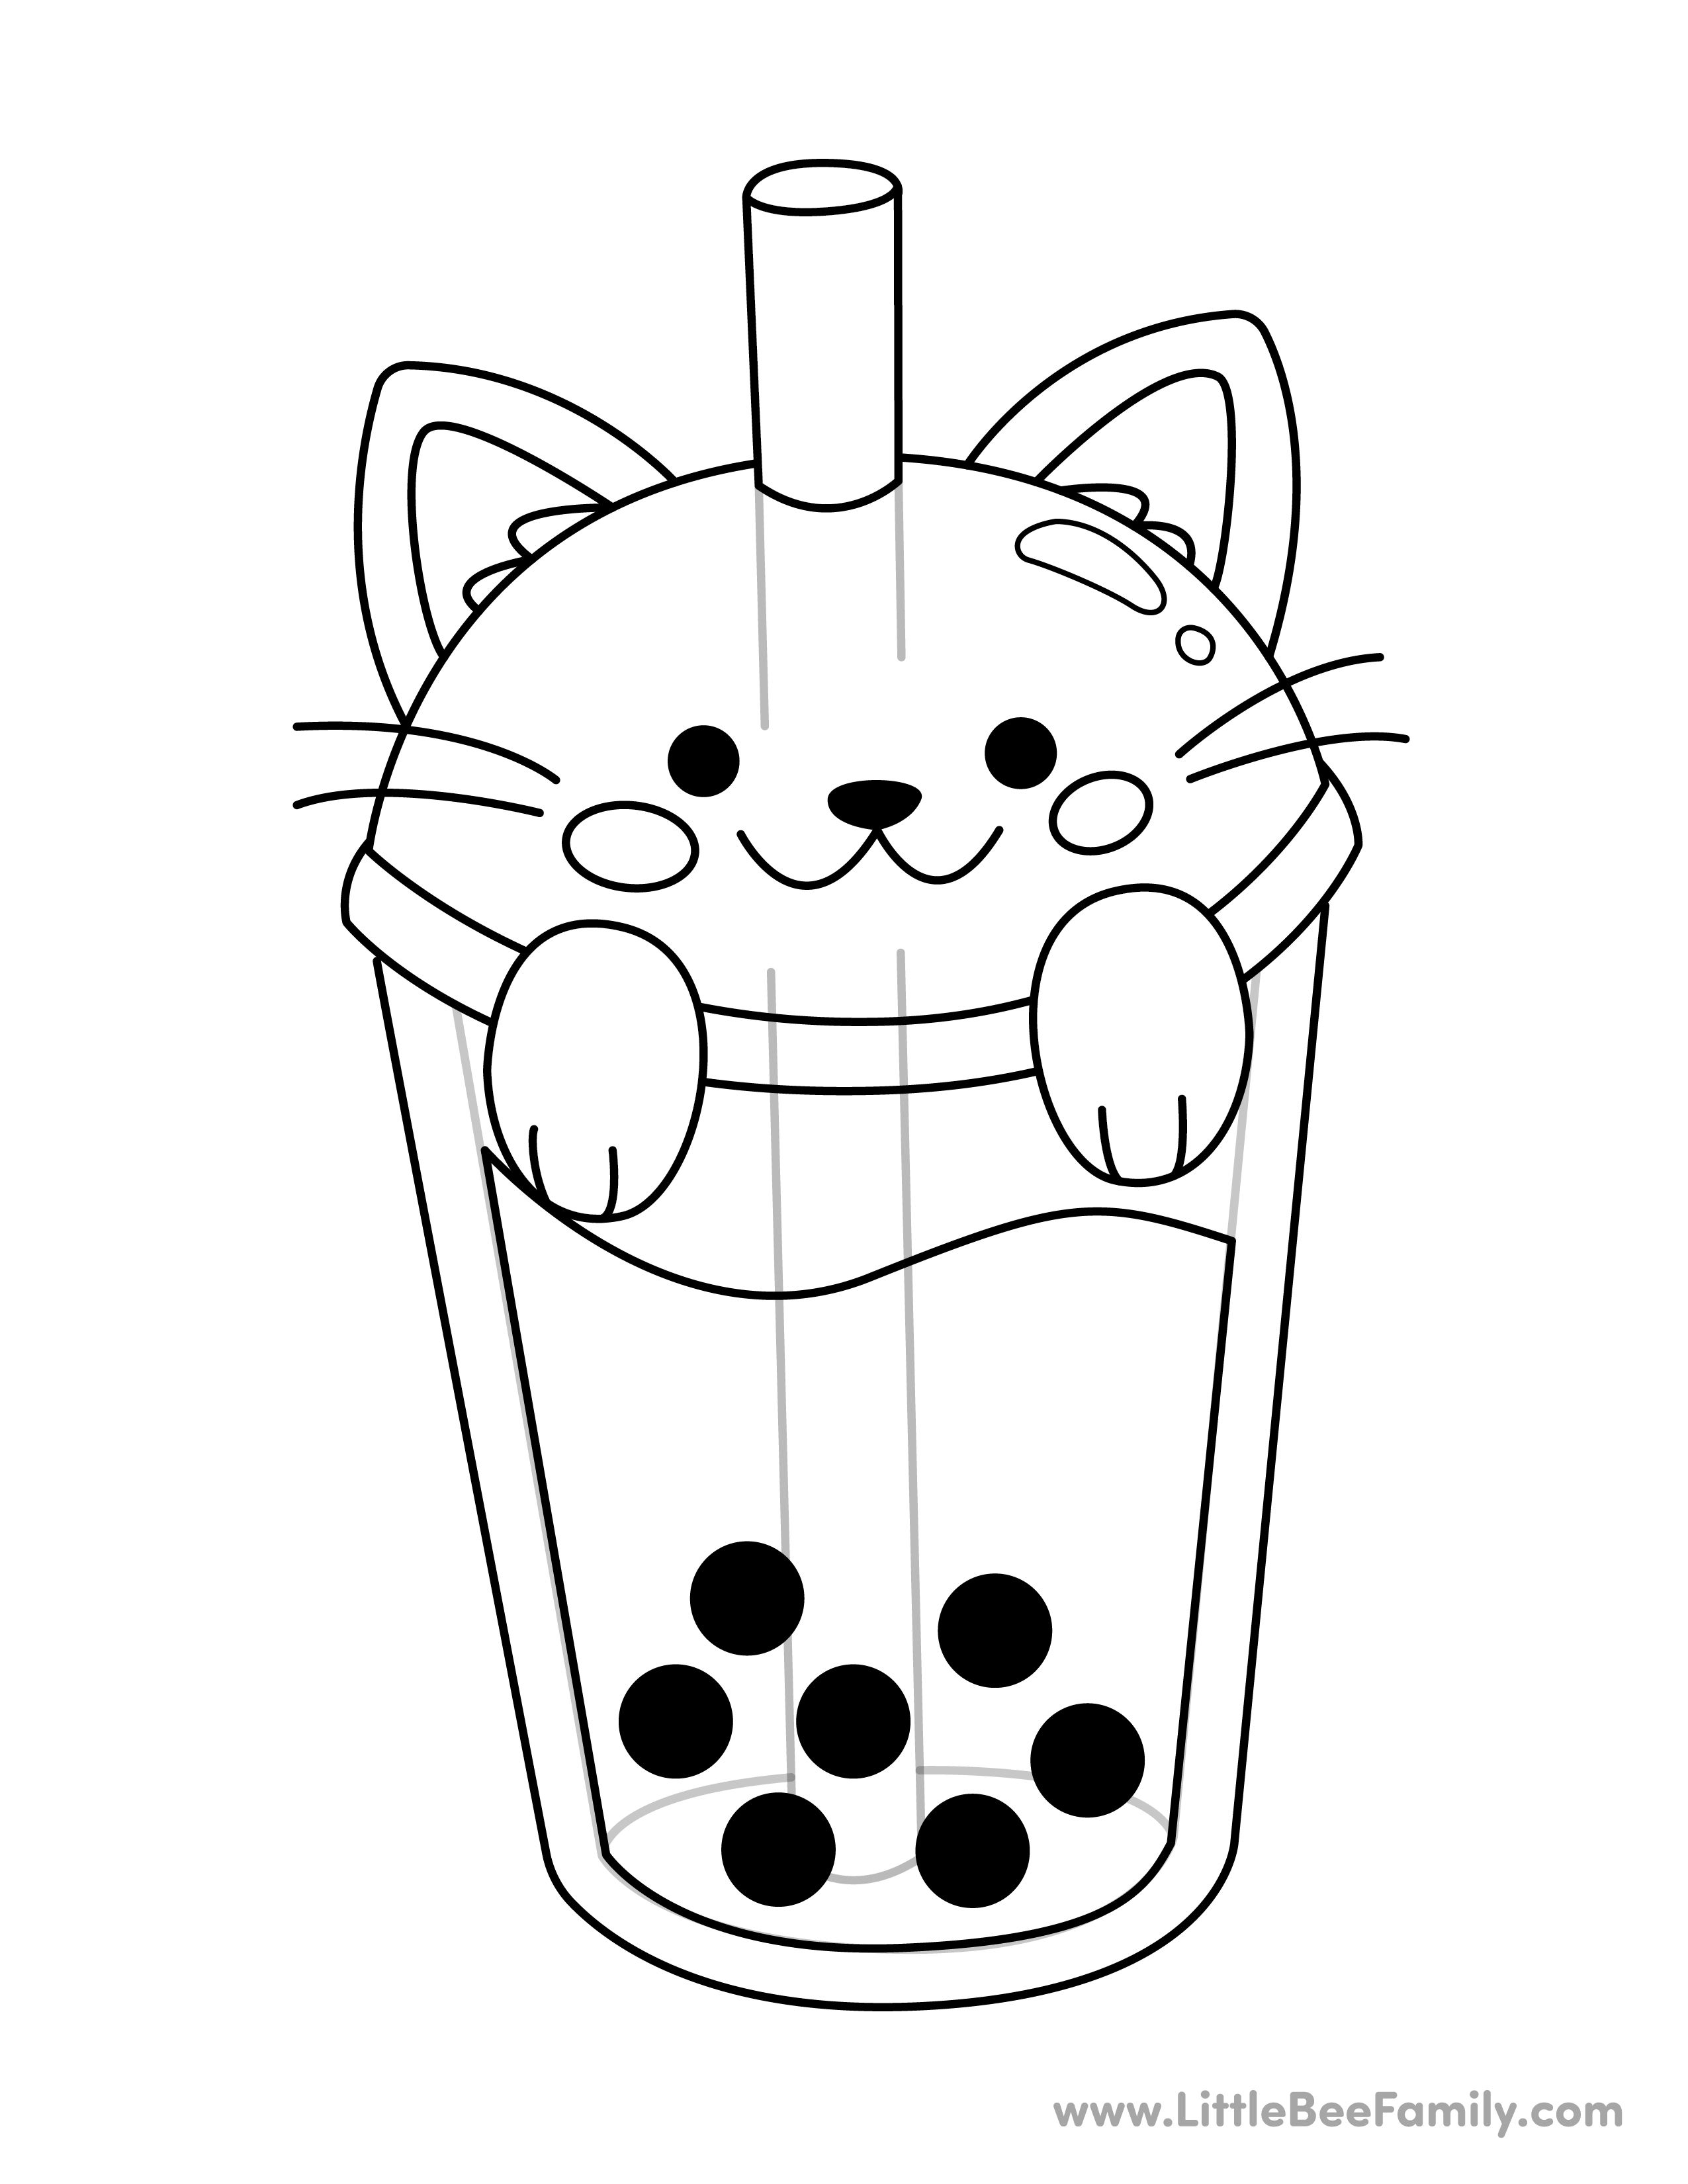 Boba Cat Coloring Page | Cat coloring ...